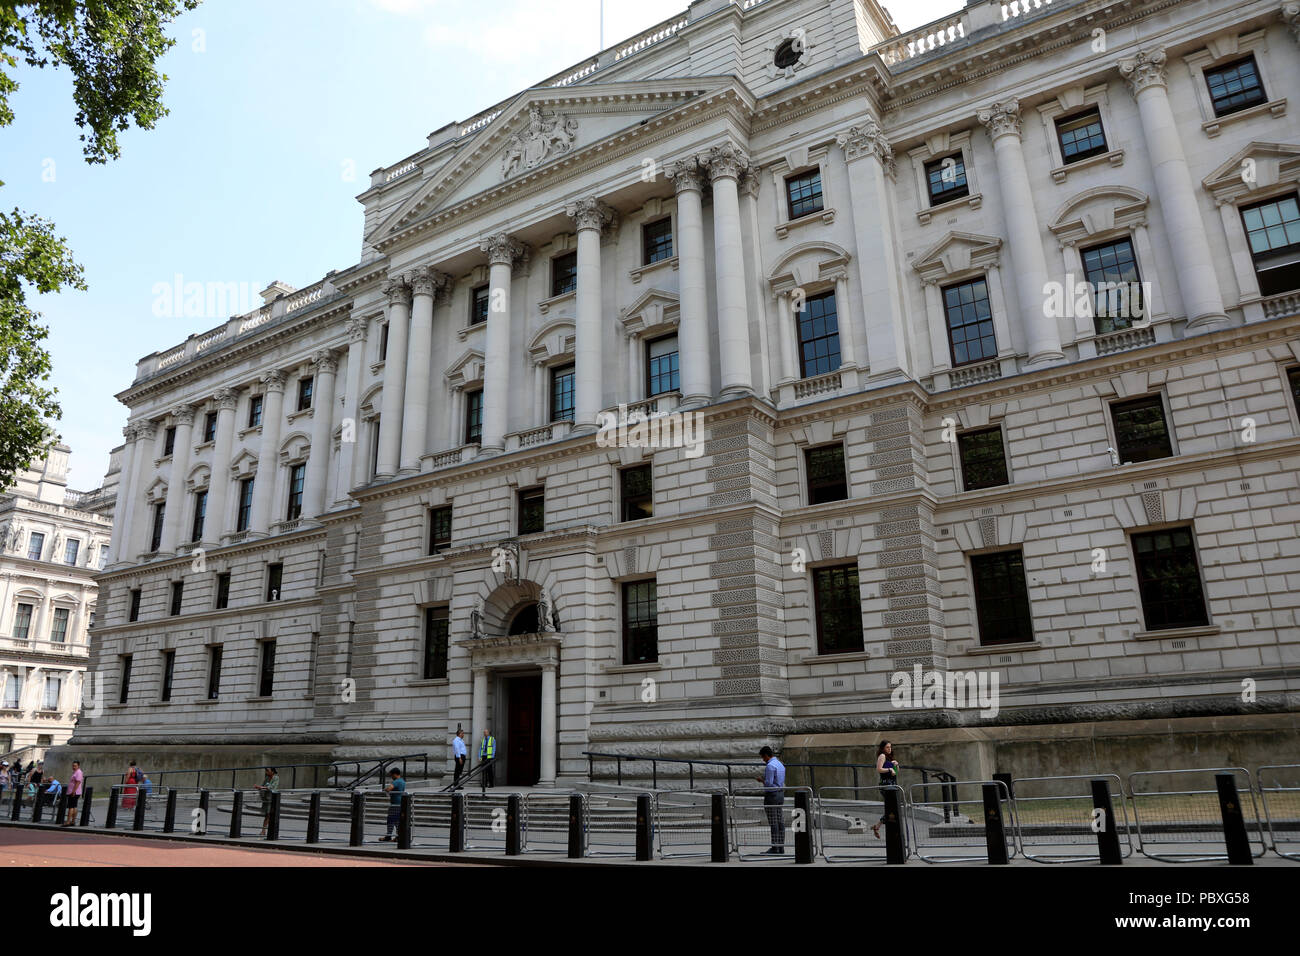 London / UK - July 26 2018: View of HM Treasury, the UK’s finance ministry, on Horse Guards Road Stock Photo